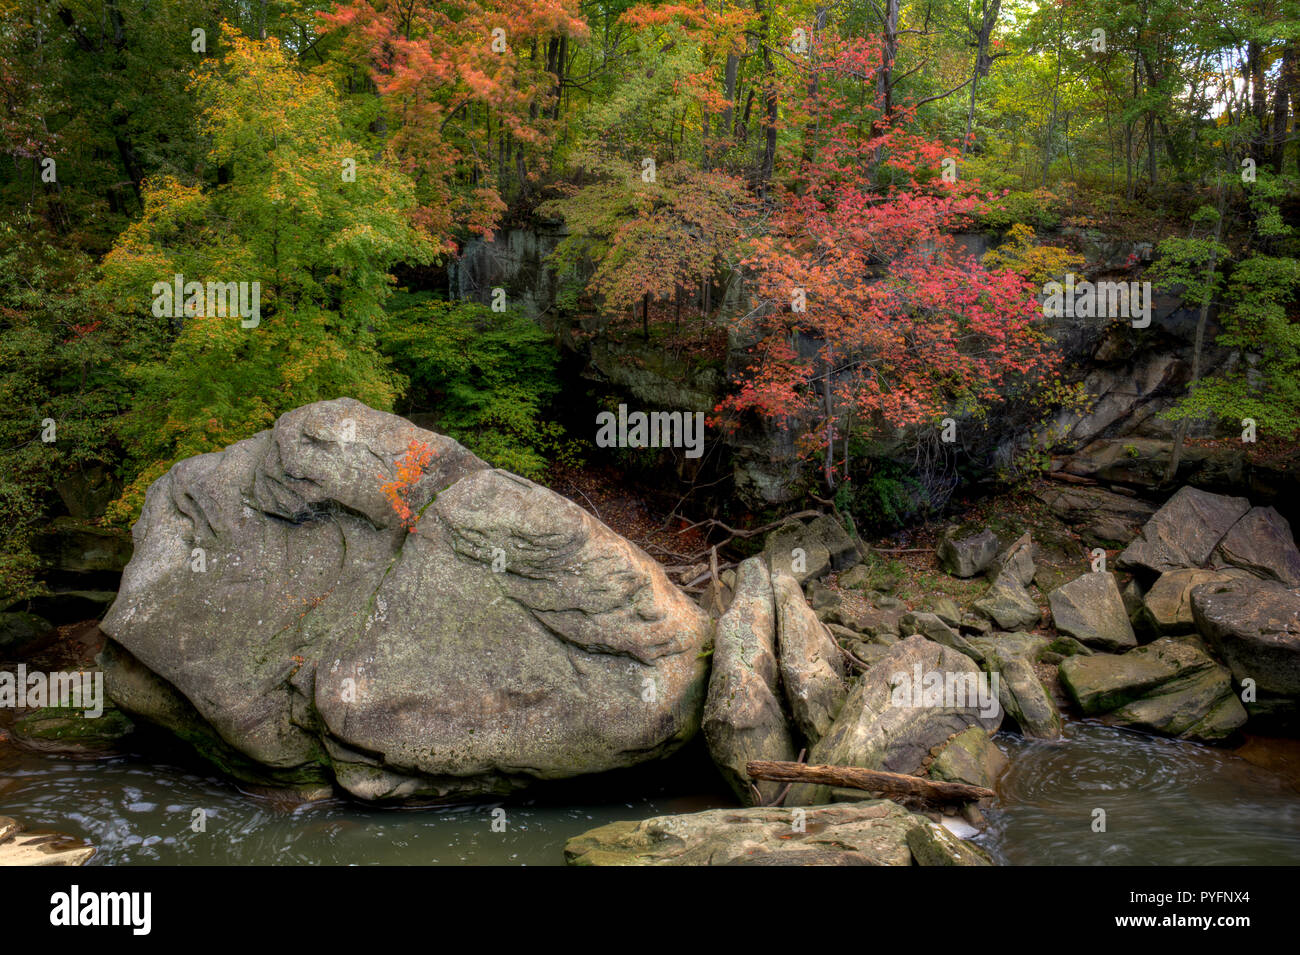 A beautiful autumn scene along the Rocky River in Berea Ohio. Giant sandstone boulders sit in the river giving it its name. Stock Photo